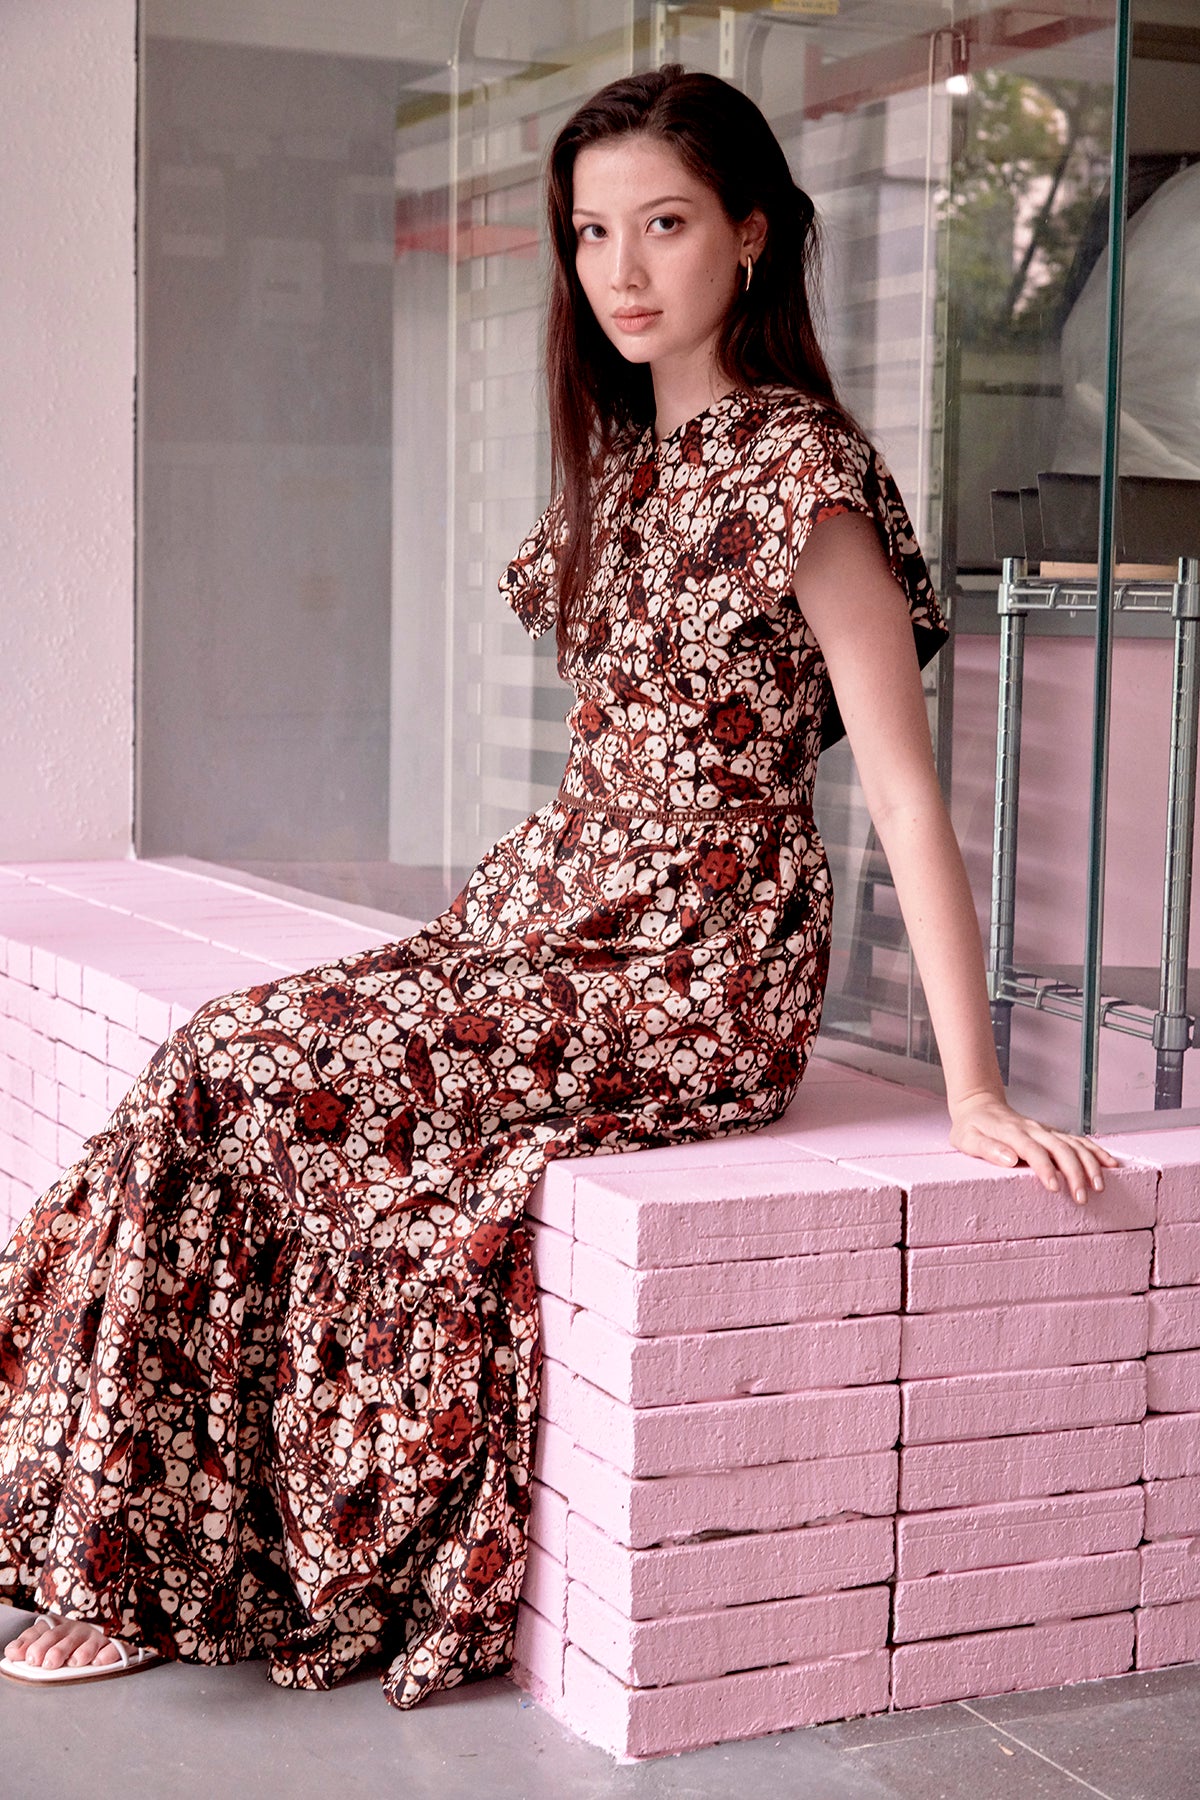 Eurasian model with long hair,  seated on a pink ledge, wearing brown batik full length dress with cape sleeves